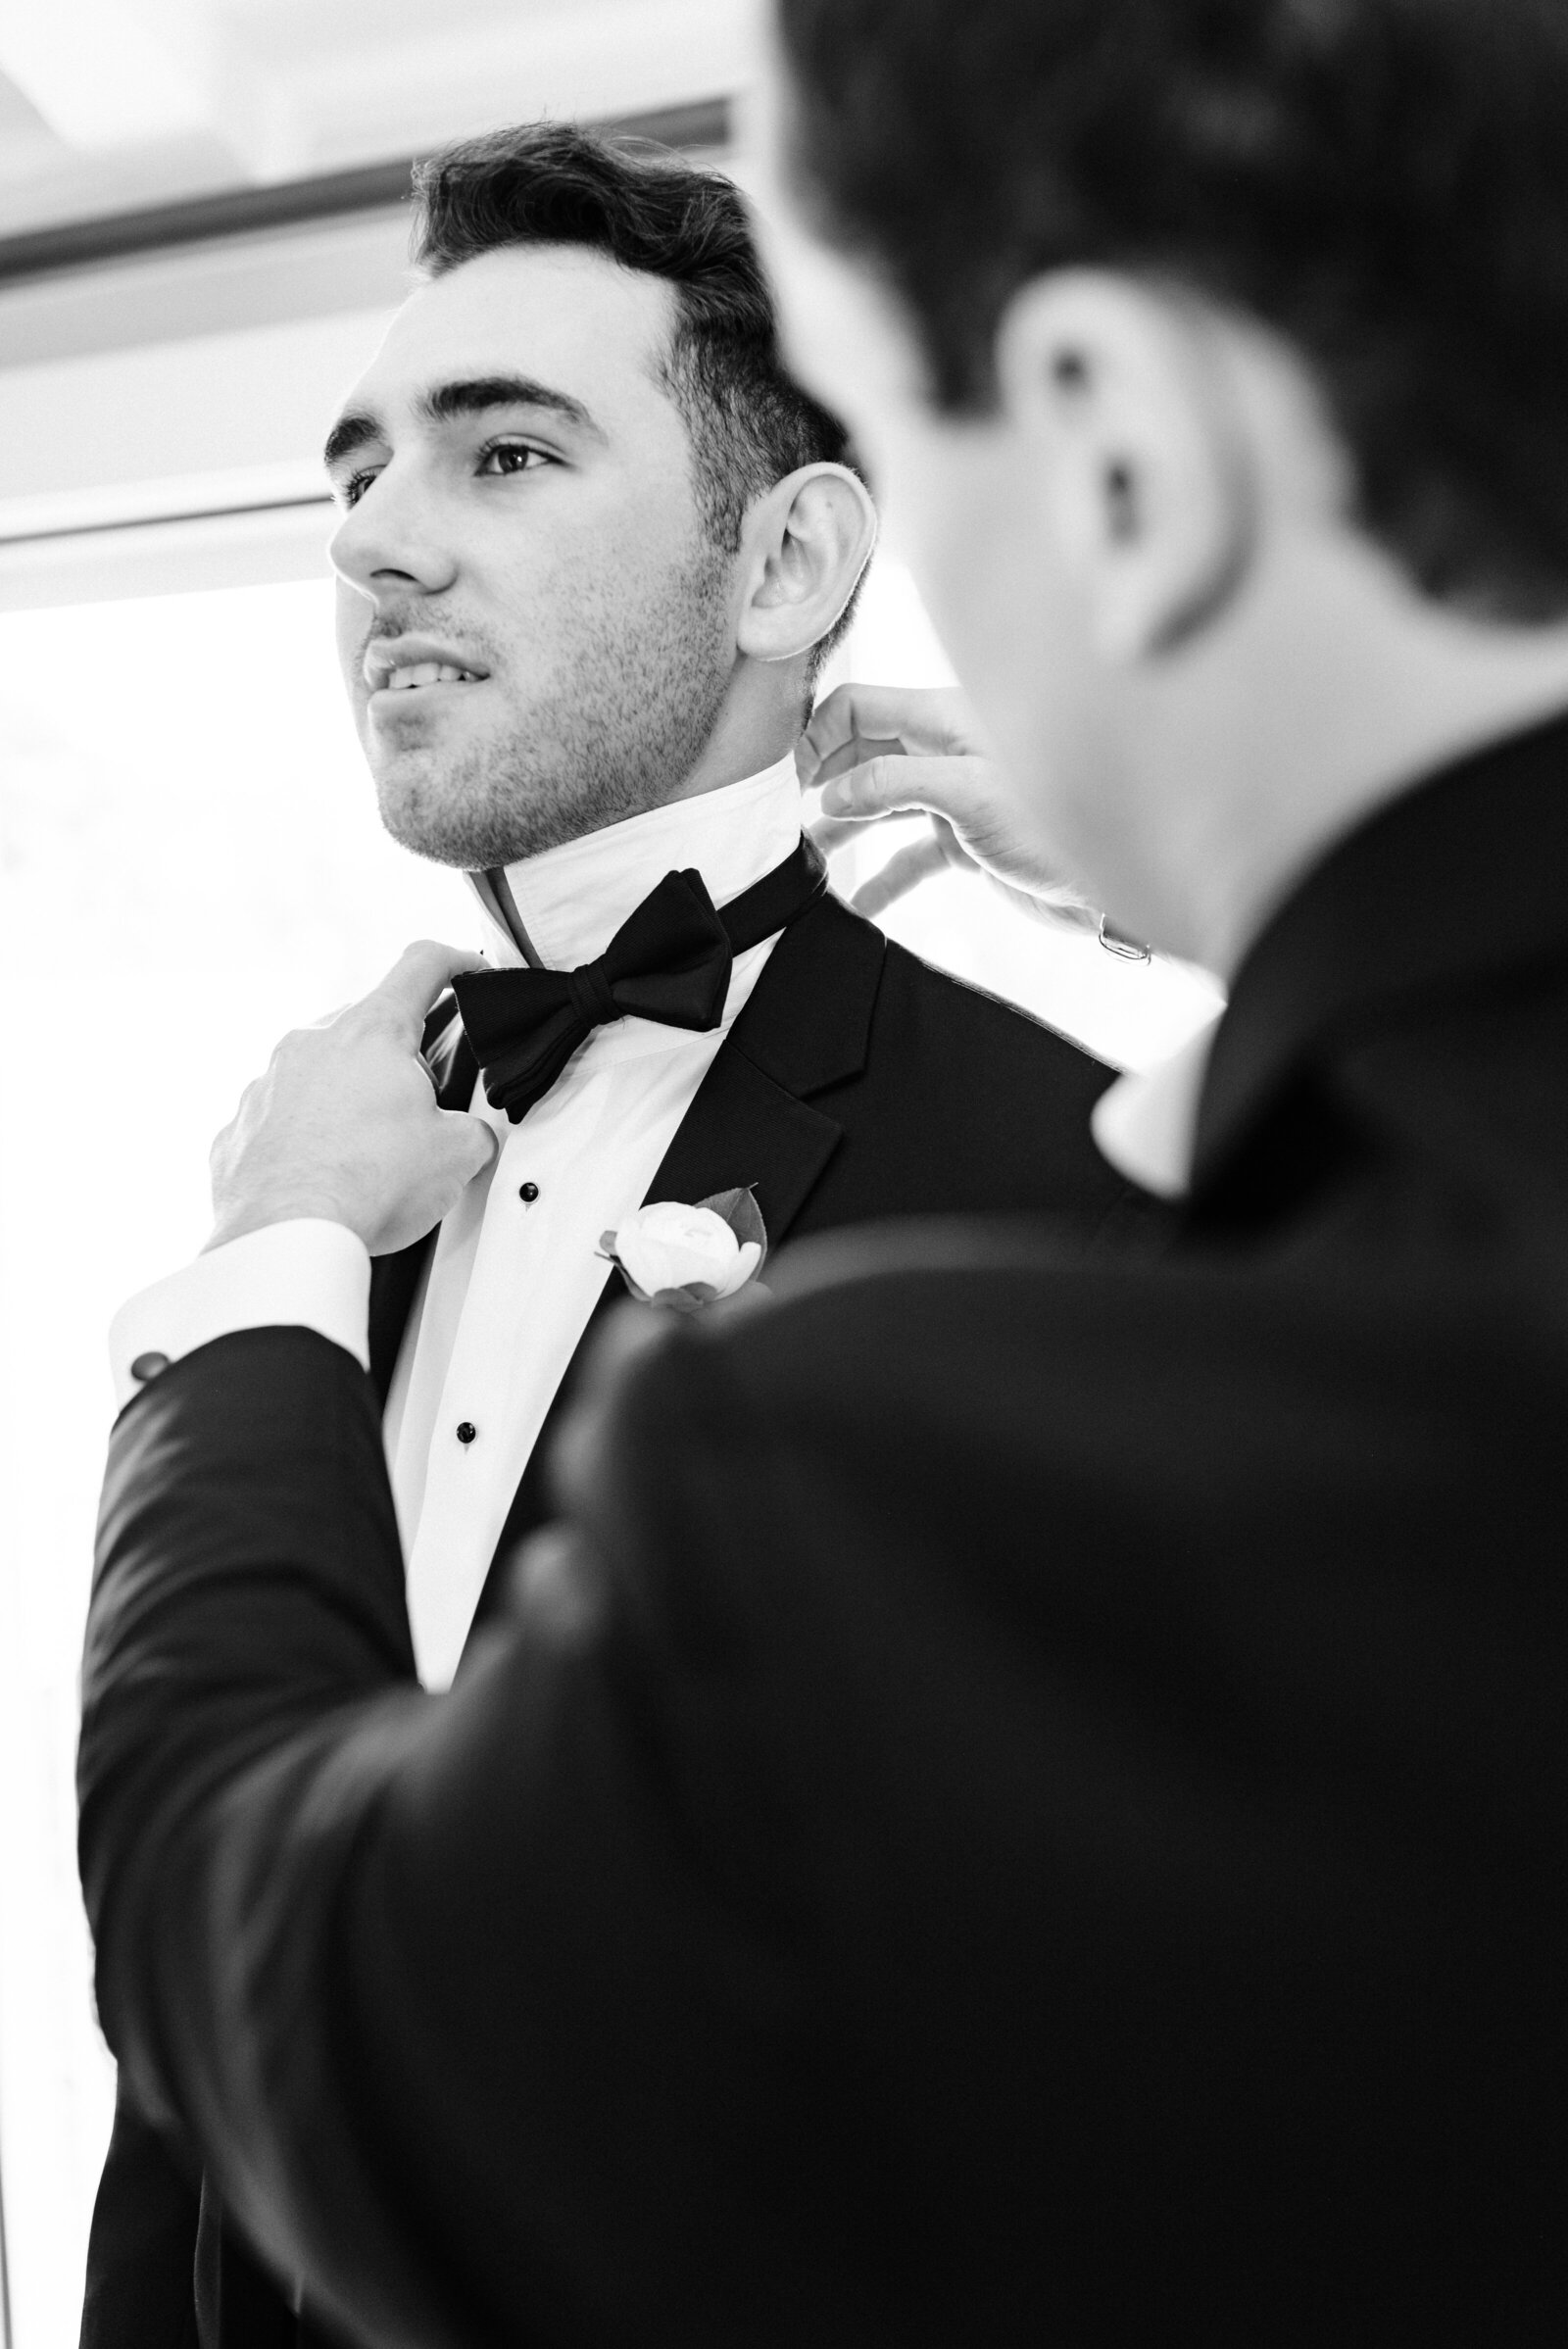 Groom getting ready with his bowtie